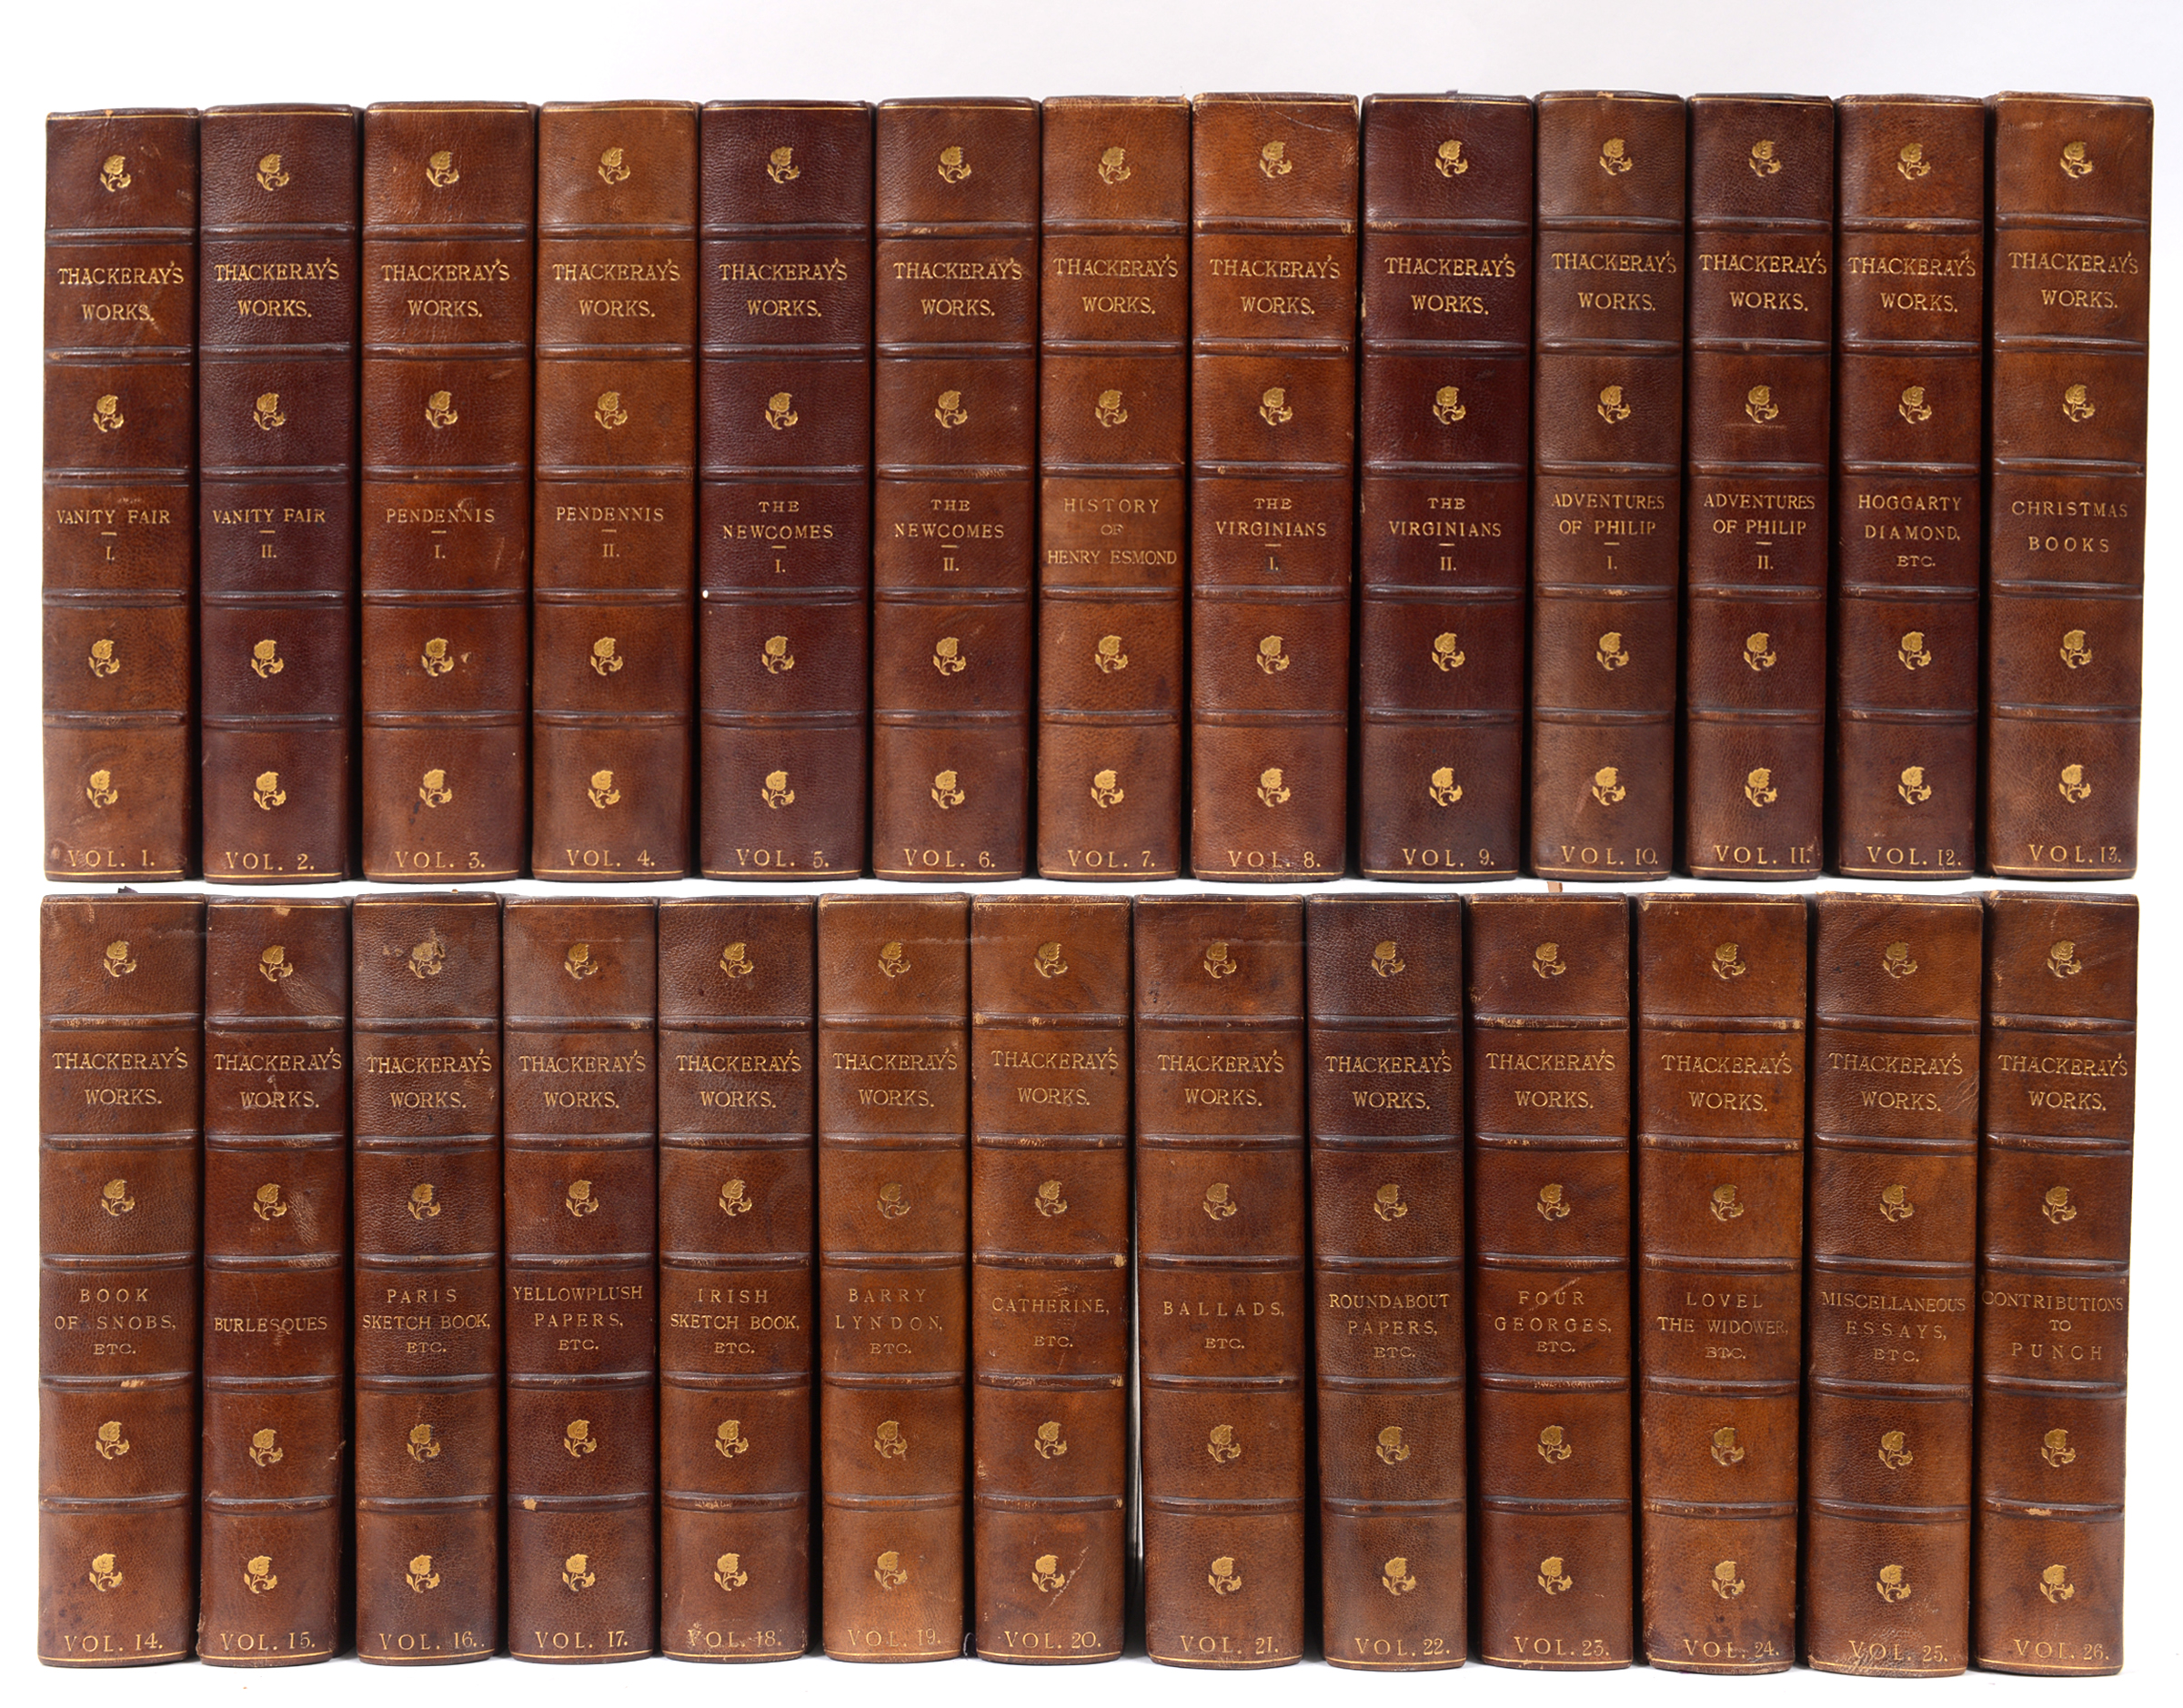 Thackeray (William Makepeace) Works of, 1878-1886, 26 vols,